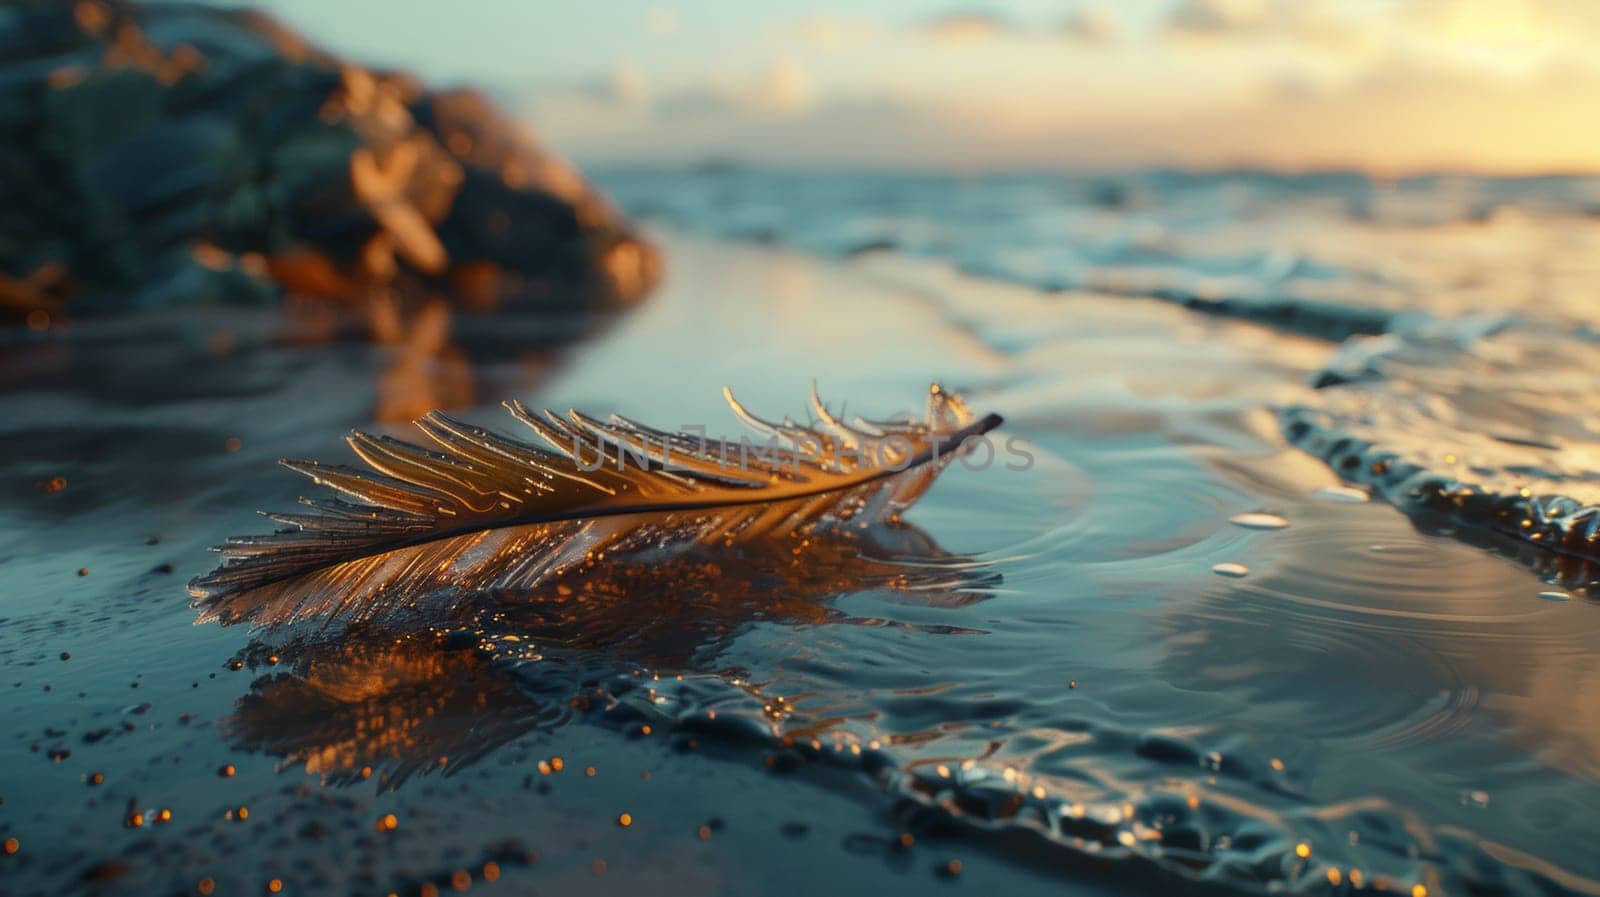 A feather laying on the beach next to a body of water